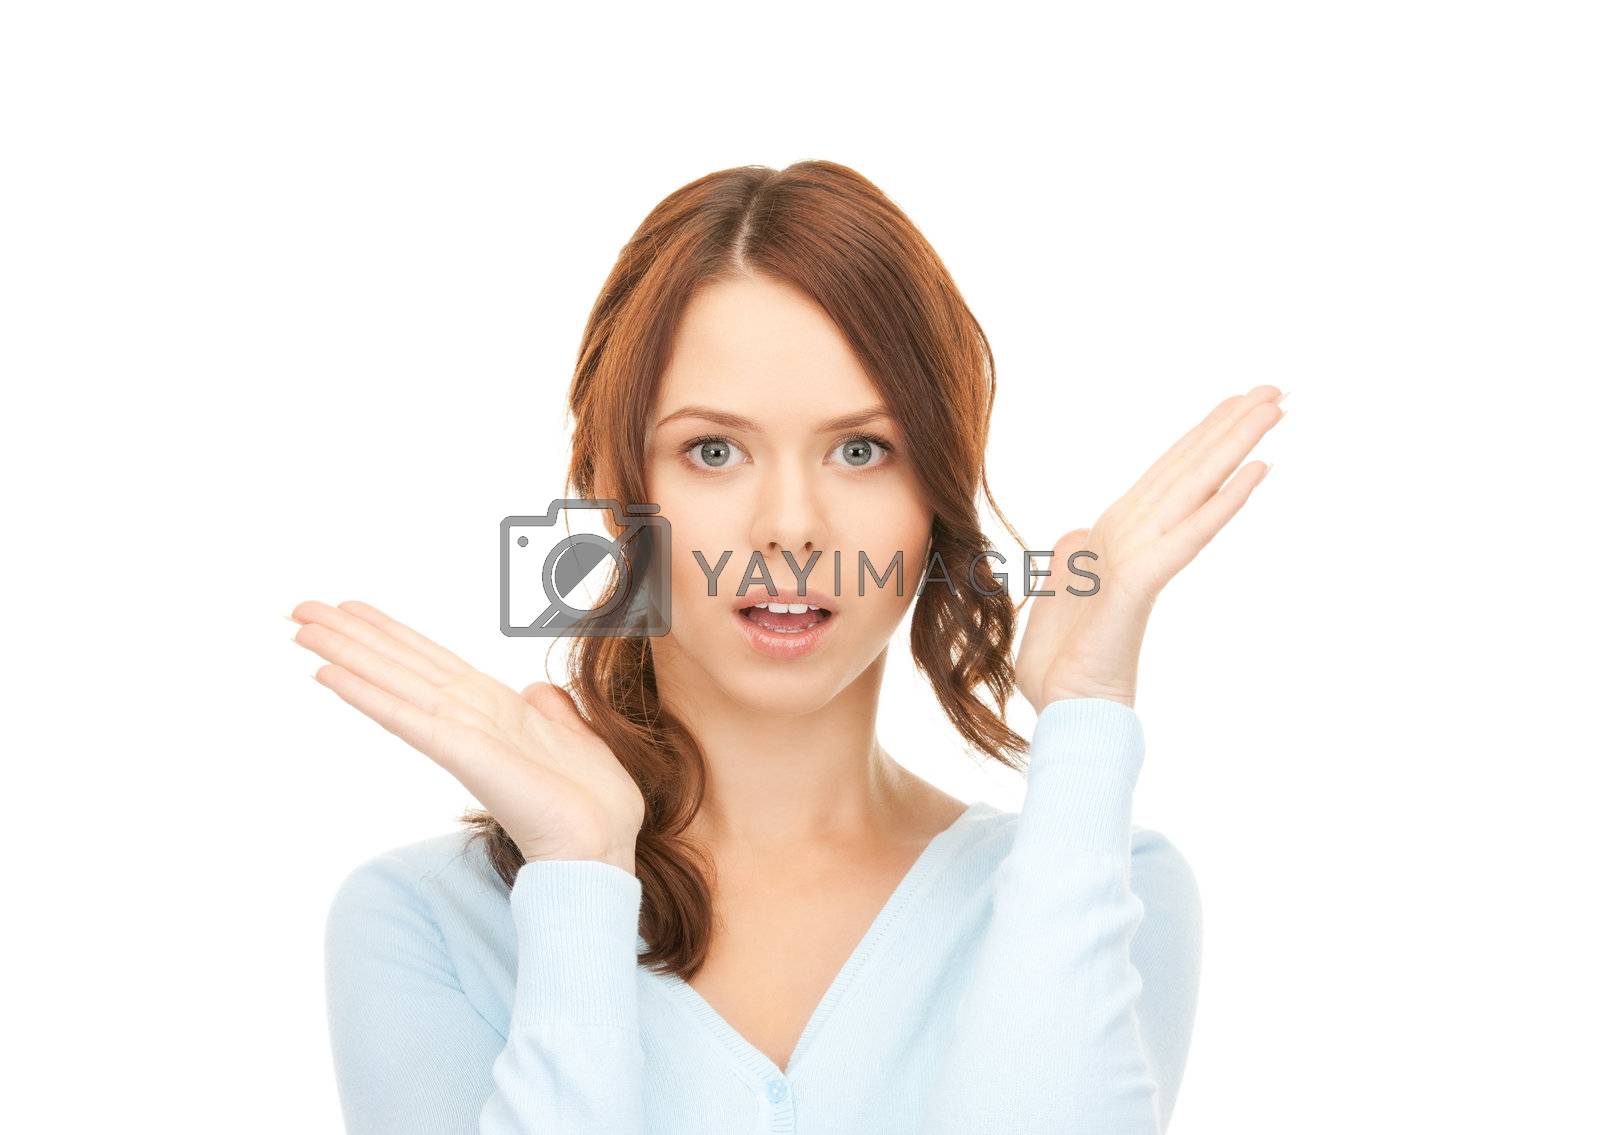 Royalty free image of woman with facial expression of surprise by dolgachov